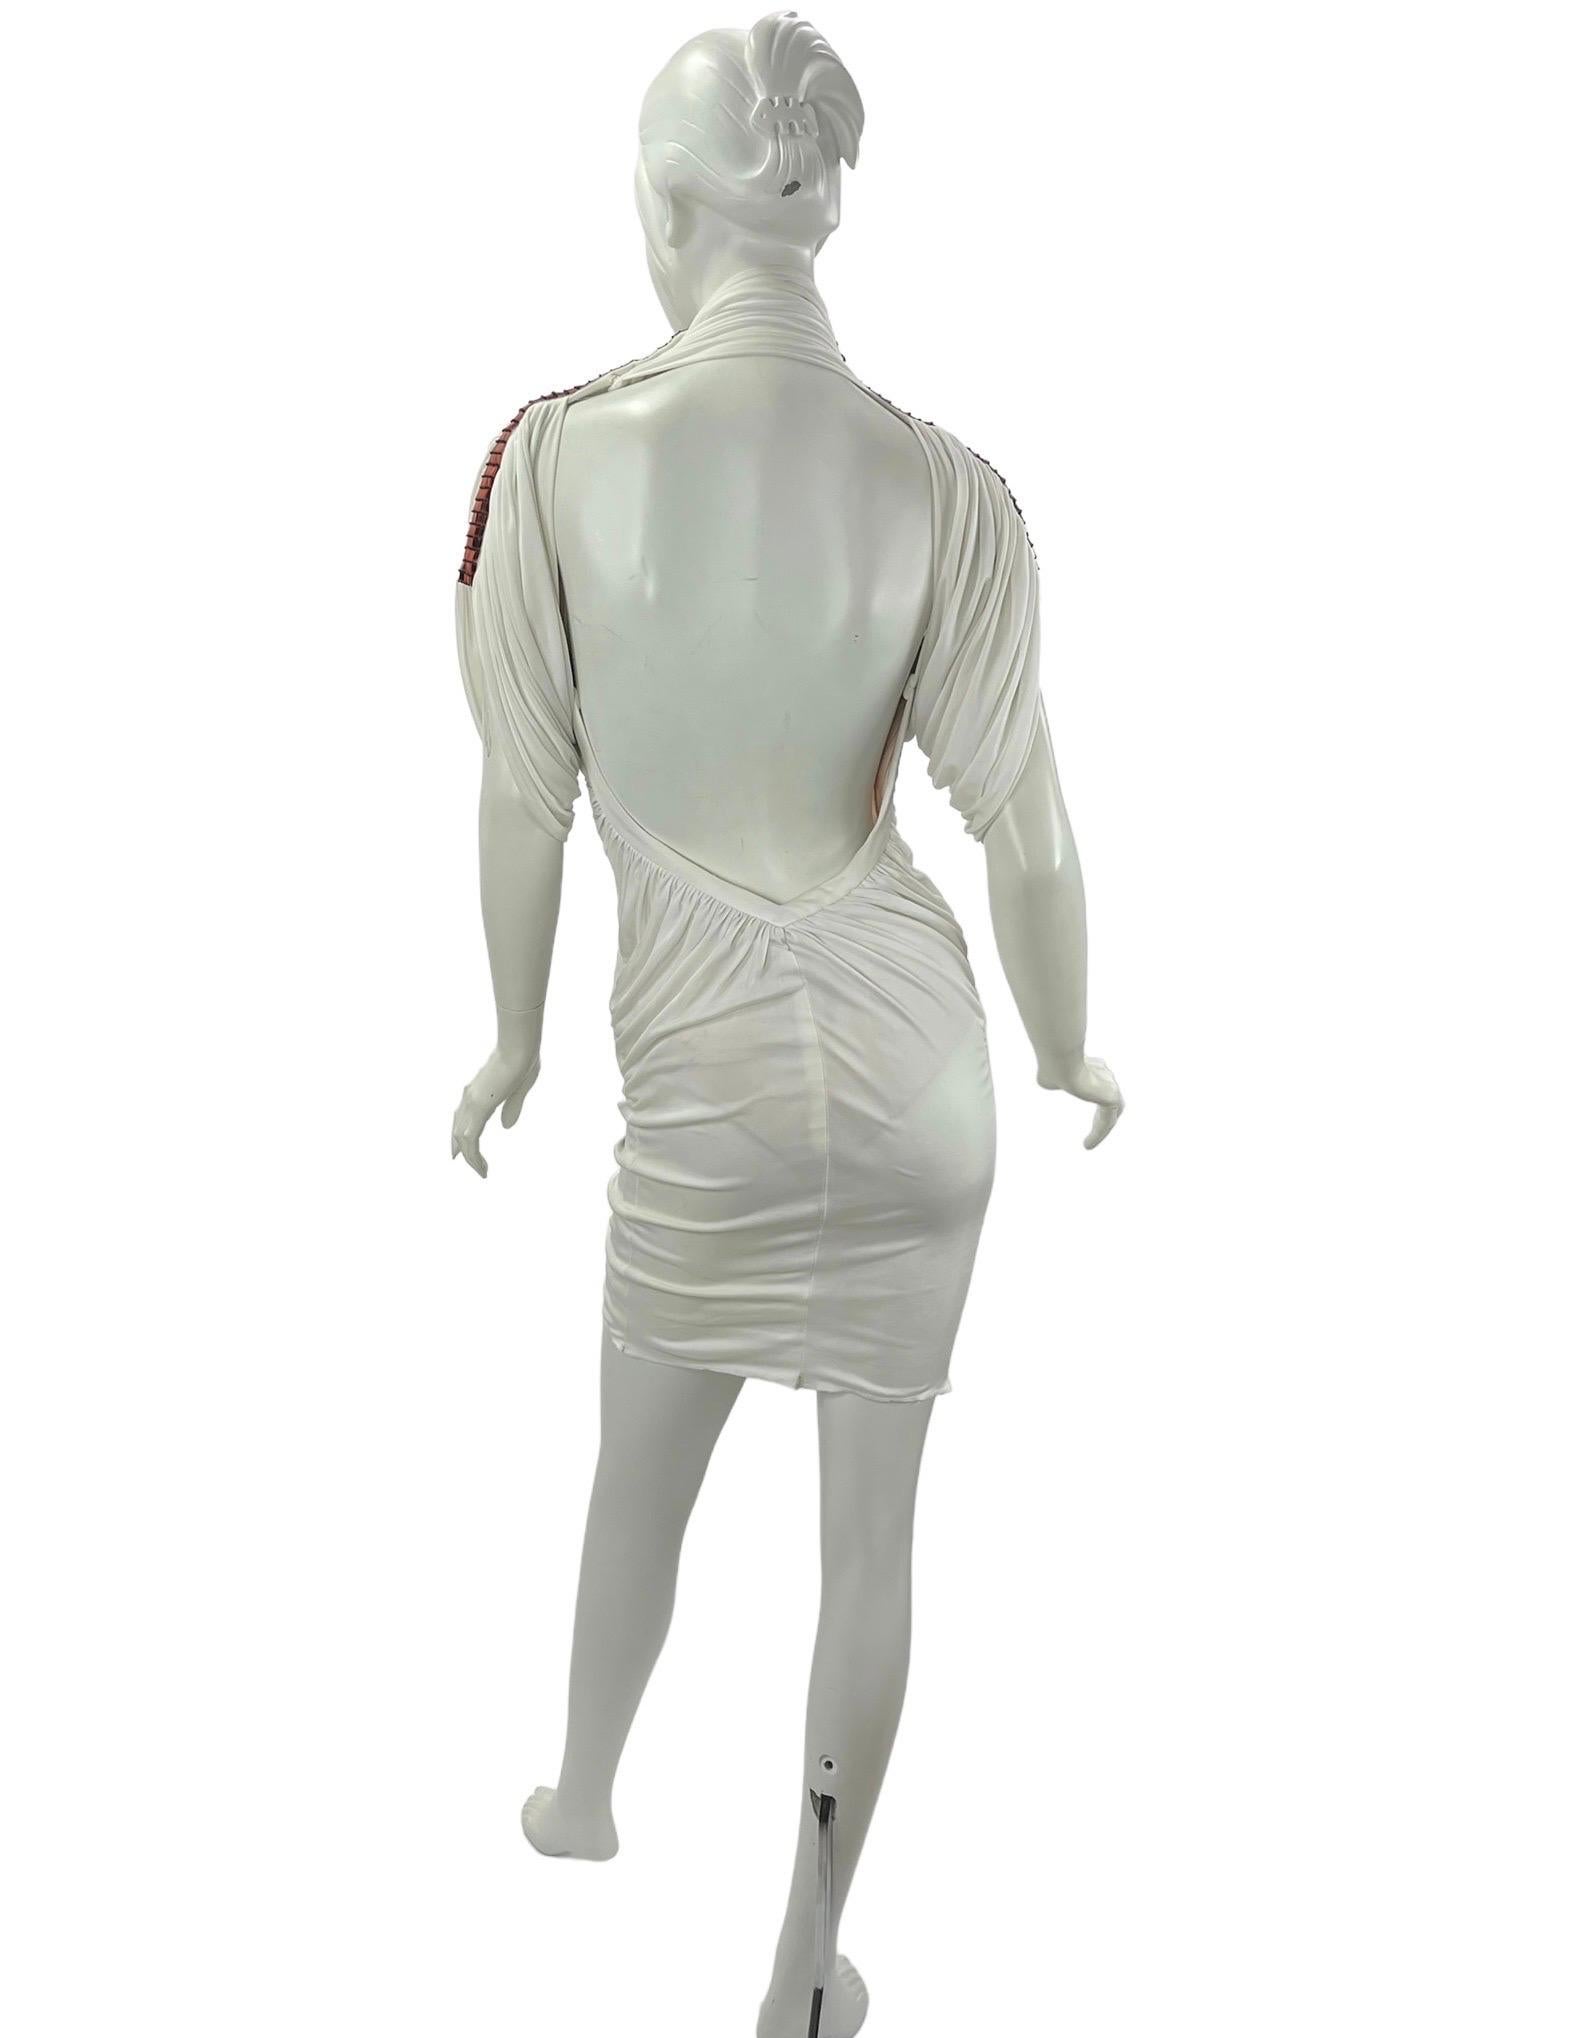 Women's S/S 2001 Vintage Gianni Versace Couture Embellished White Turtleneck Dress It 38 For Sale